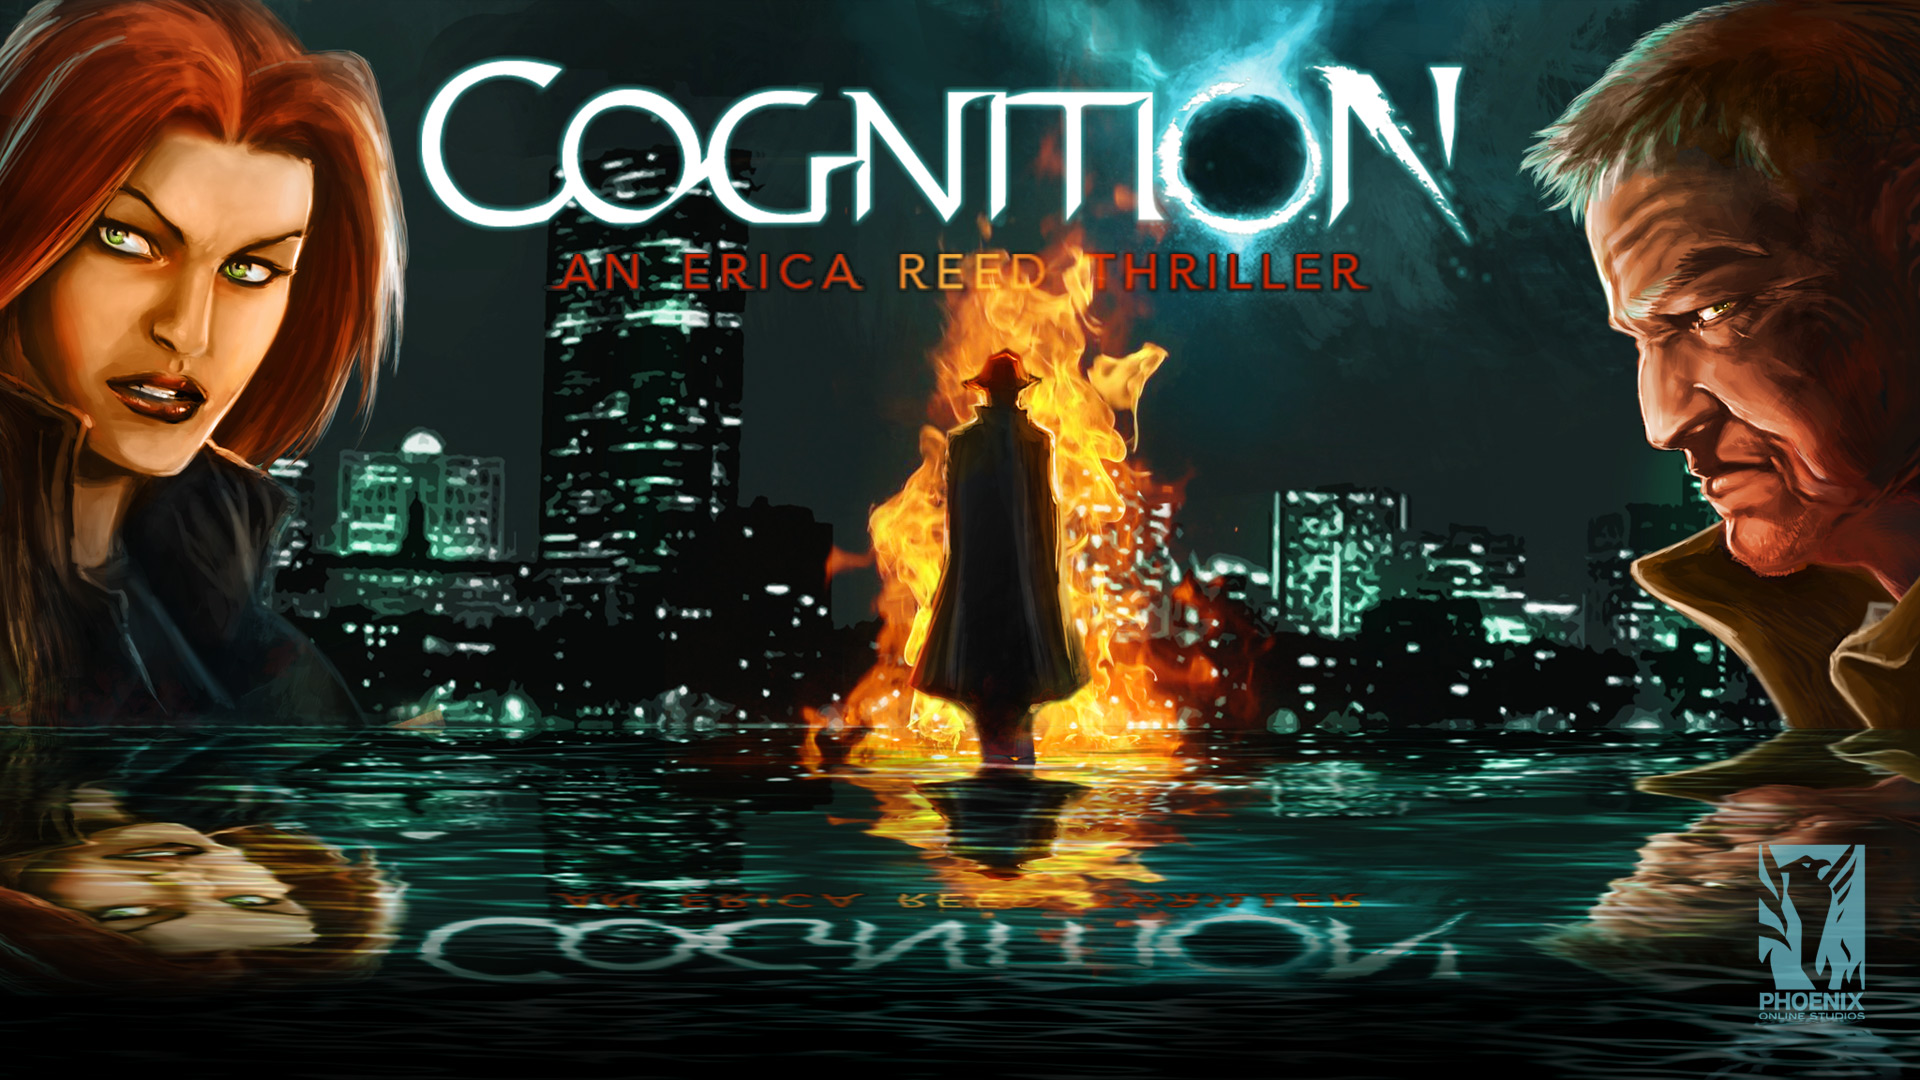 Wallpaper From Cognition An Erica Reed Thriller